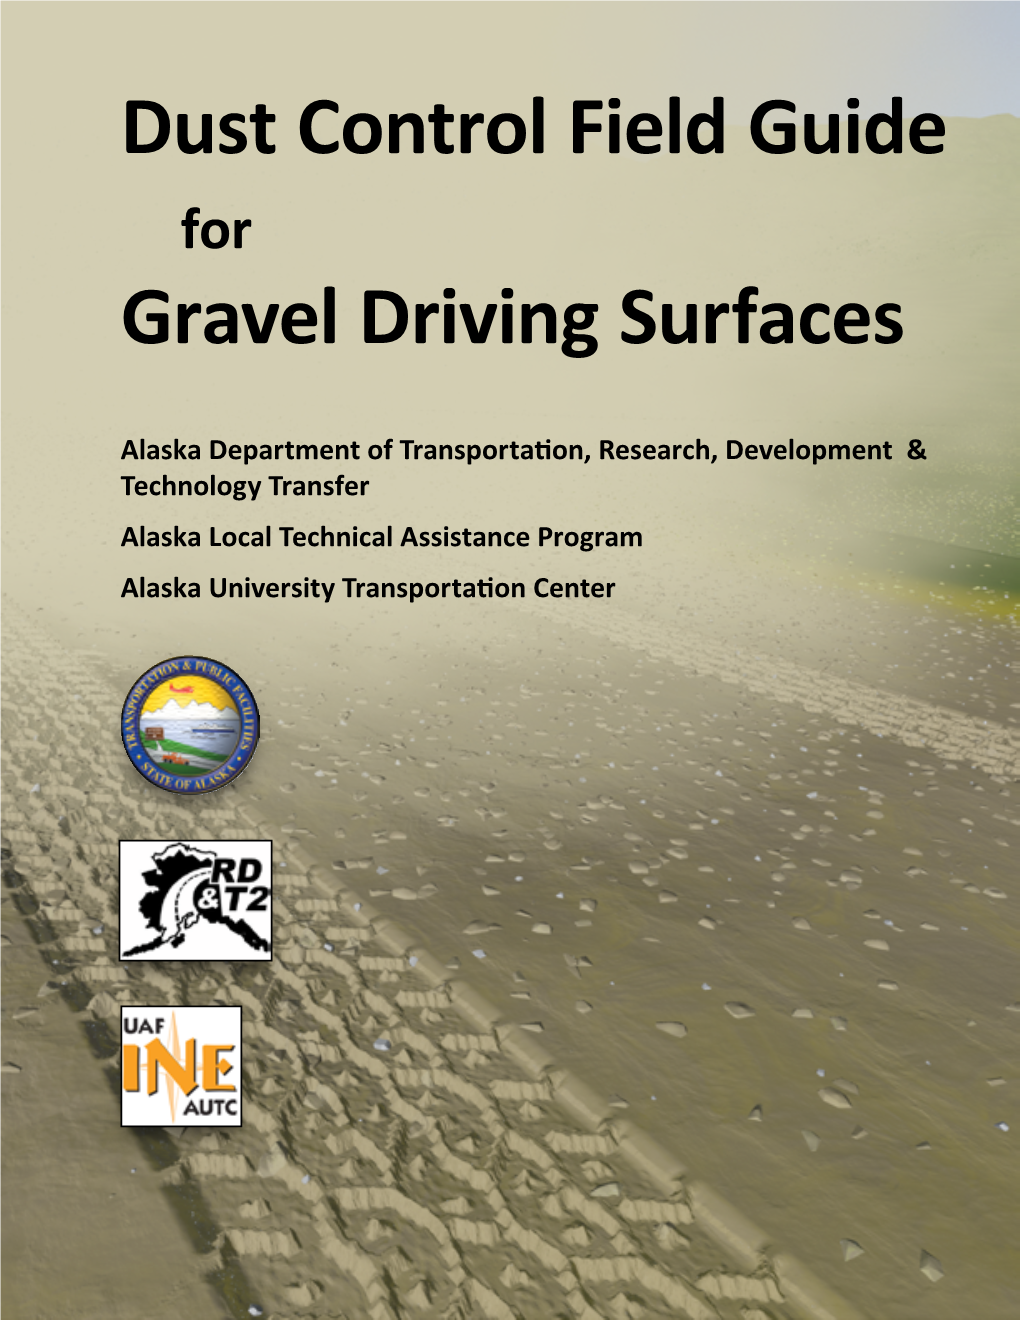 Dust Control Field Guide for Gravel Driving Surfaces